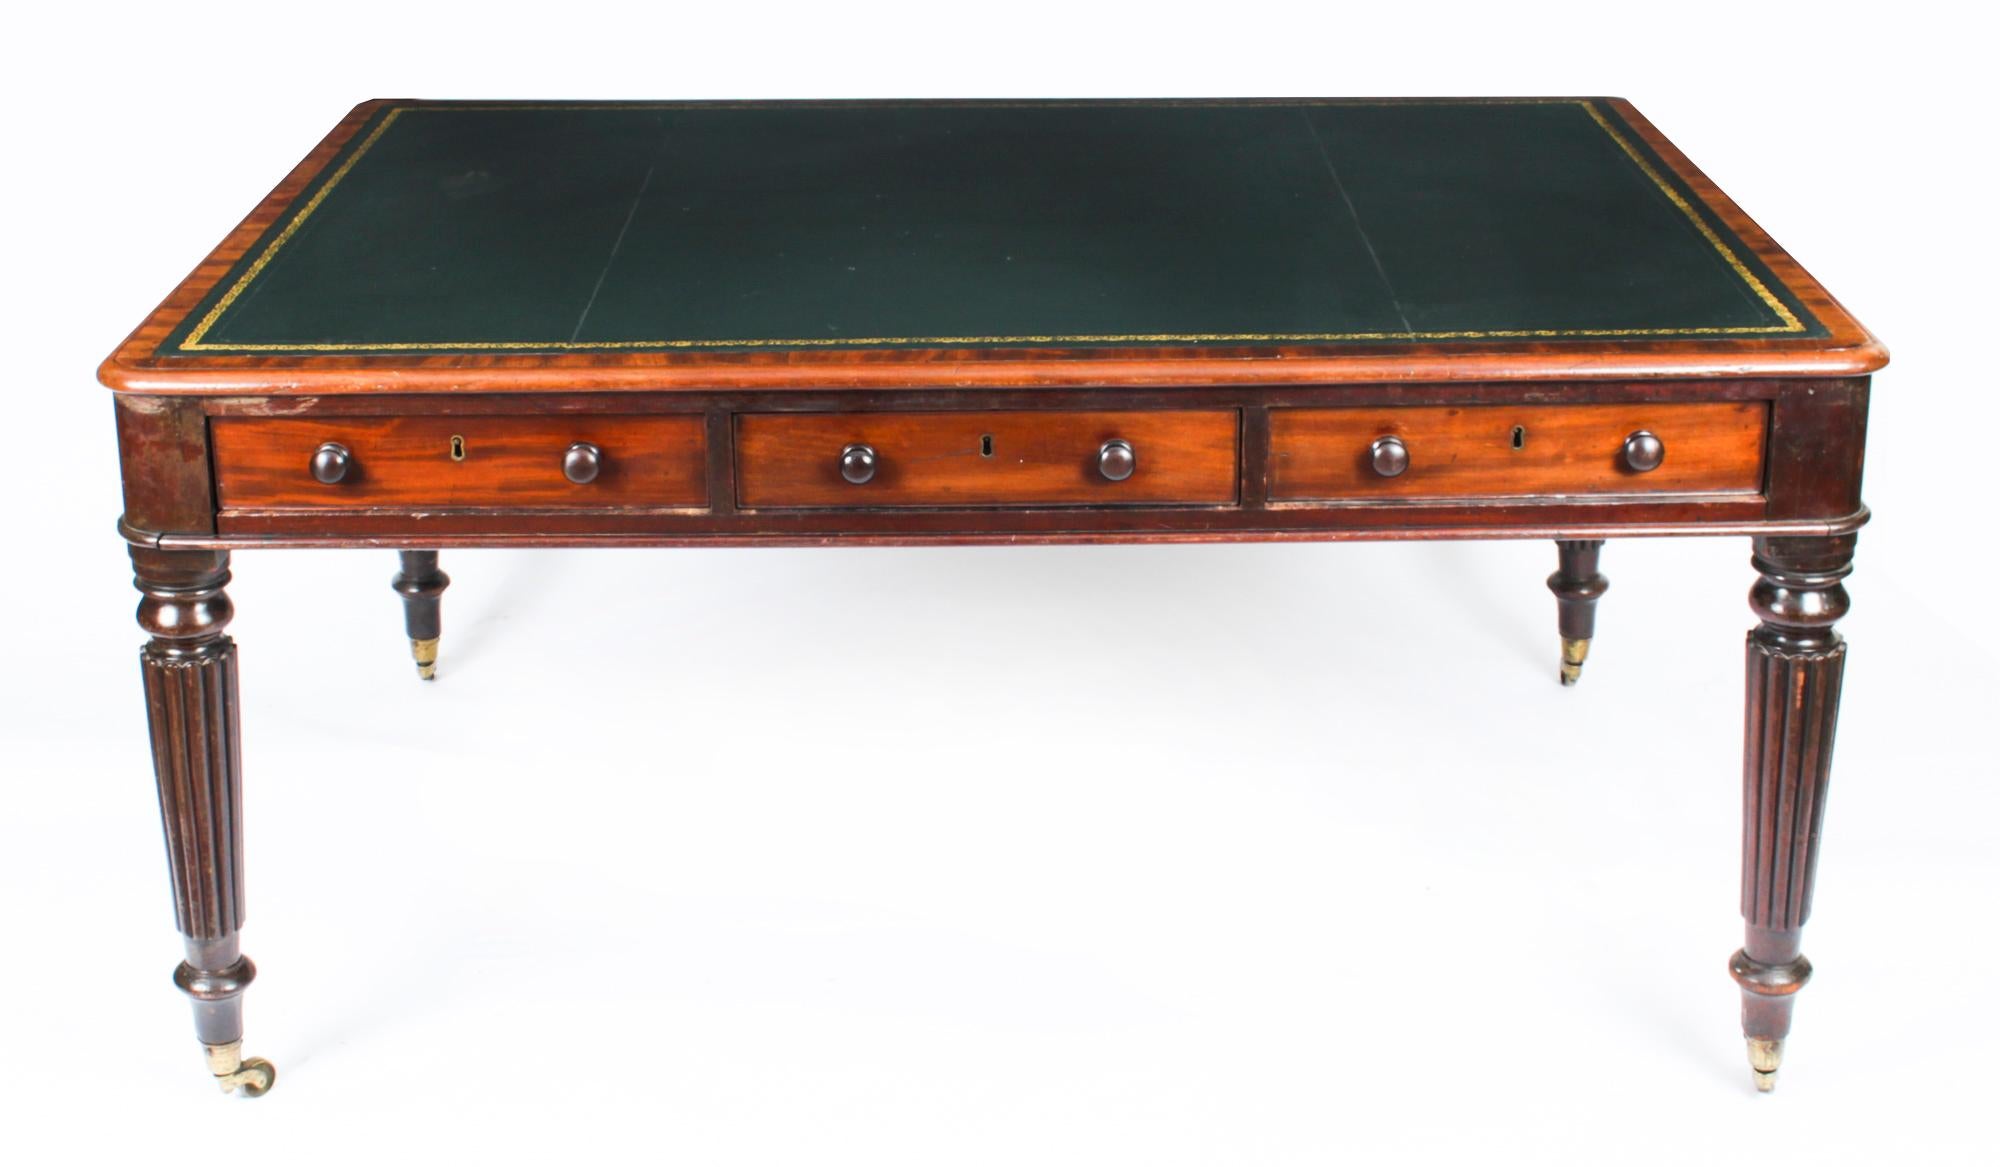 This is a superb antique William IV partners writing table in the manner of Gillows, crafted from beautiful mahogany and dating from Circa 1830.
 
The rectangular top features a moulded edge with an inset gold tooled leather writing surface over six